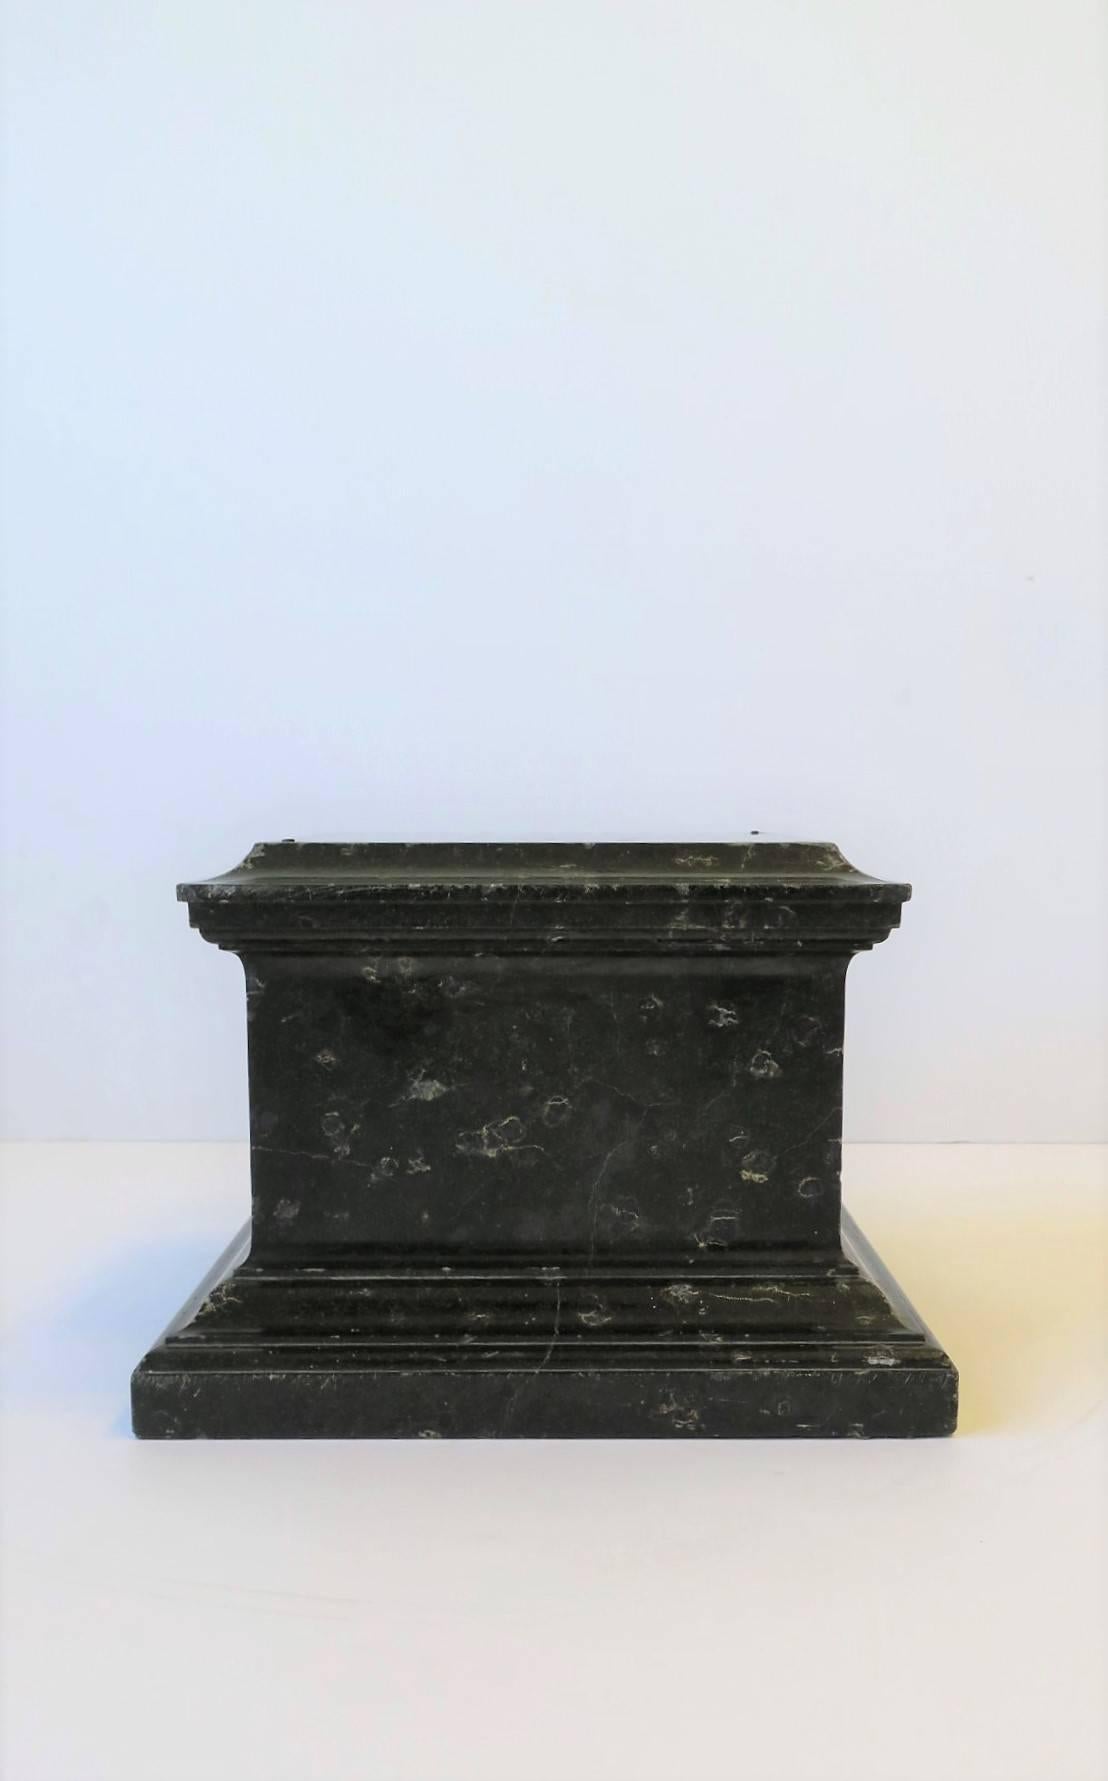 A substantial black marble or stone pedestal column or plinth base, circa late 19th century. Piece would work well for a sculpture, bust, or to display art, jewelry, etc. 

Measurements:
Overall piece measures: 9.13